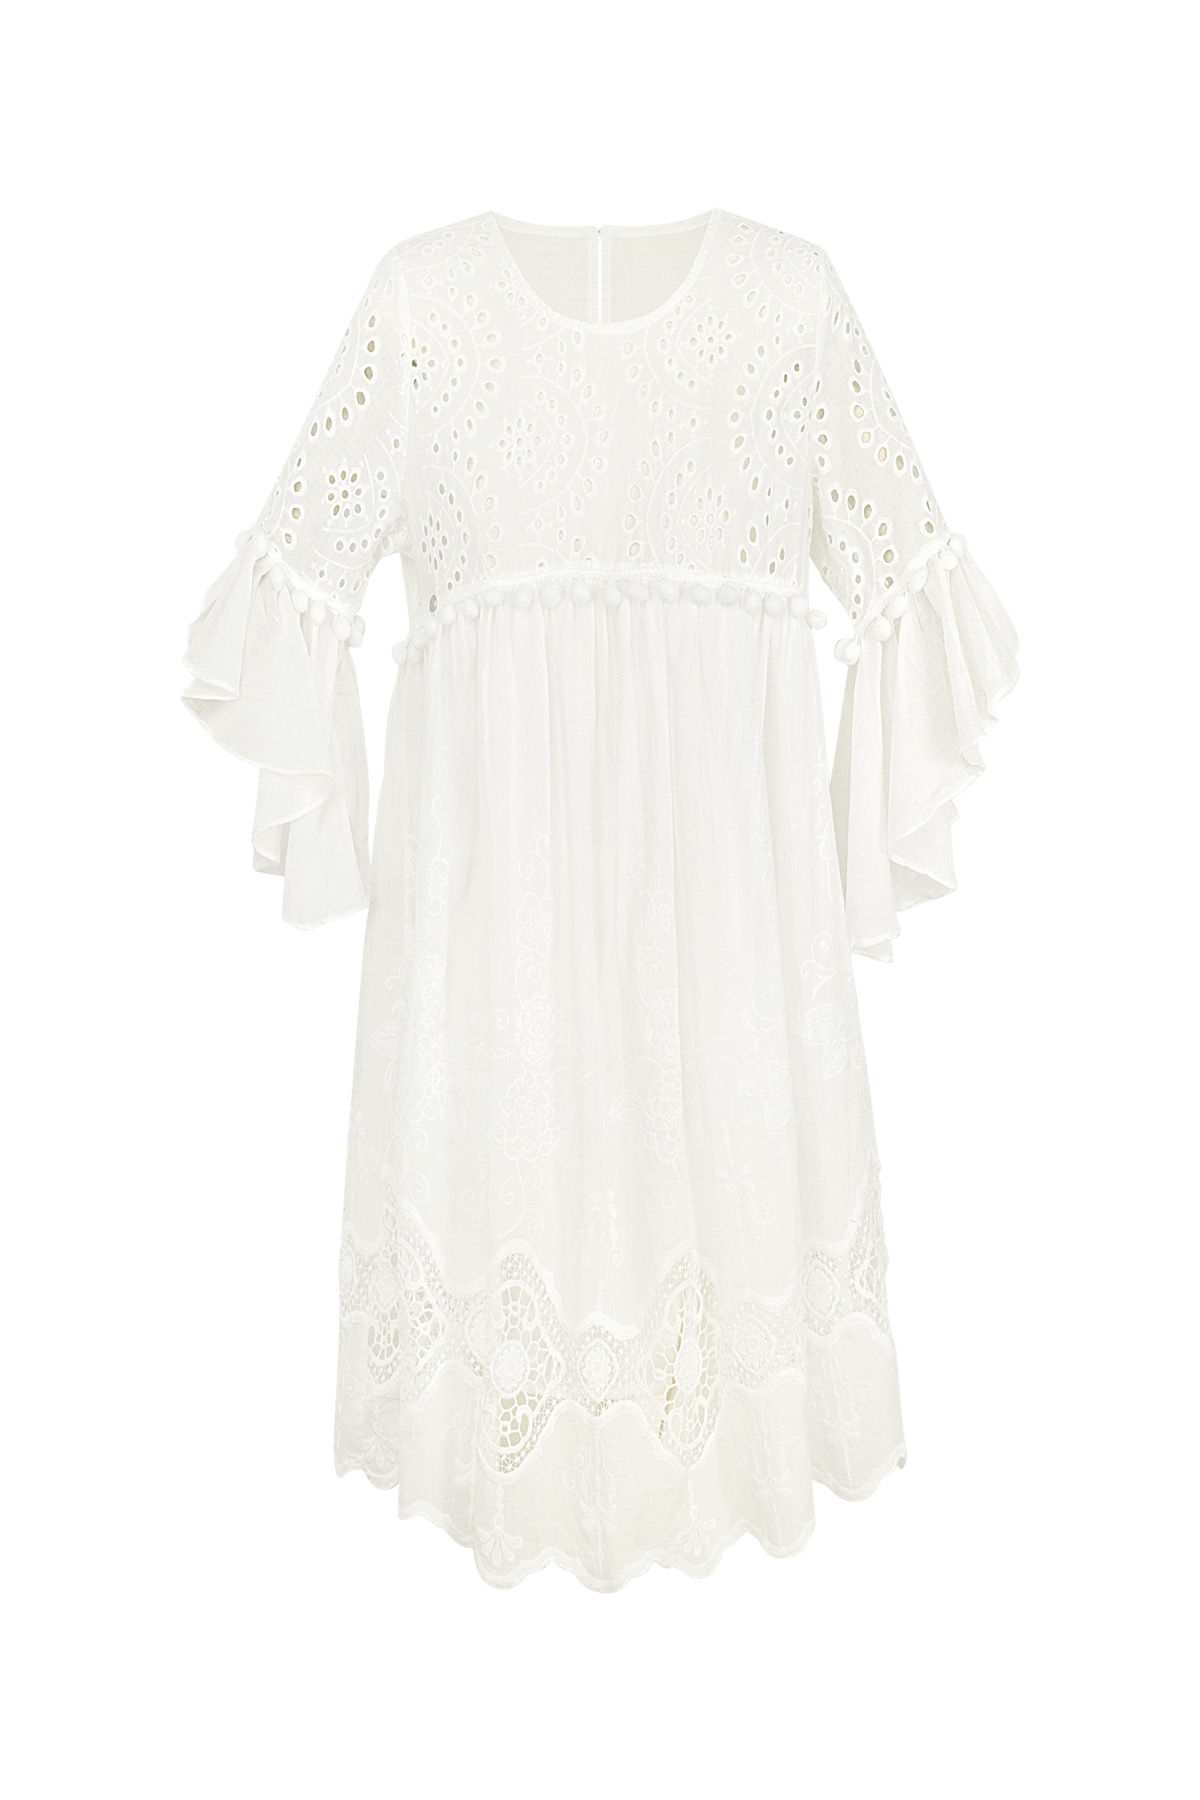 Dress embroidered details white h5 